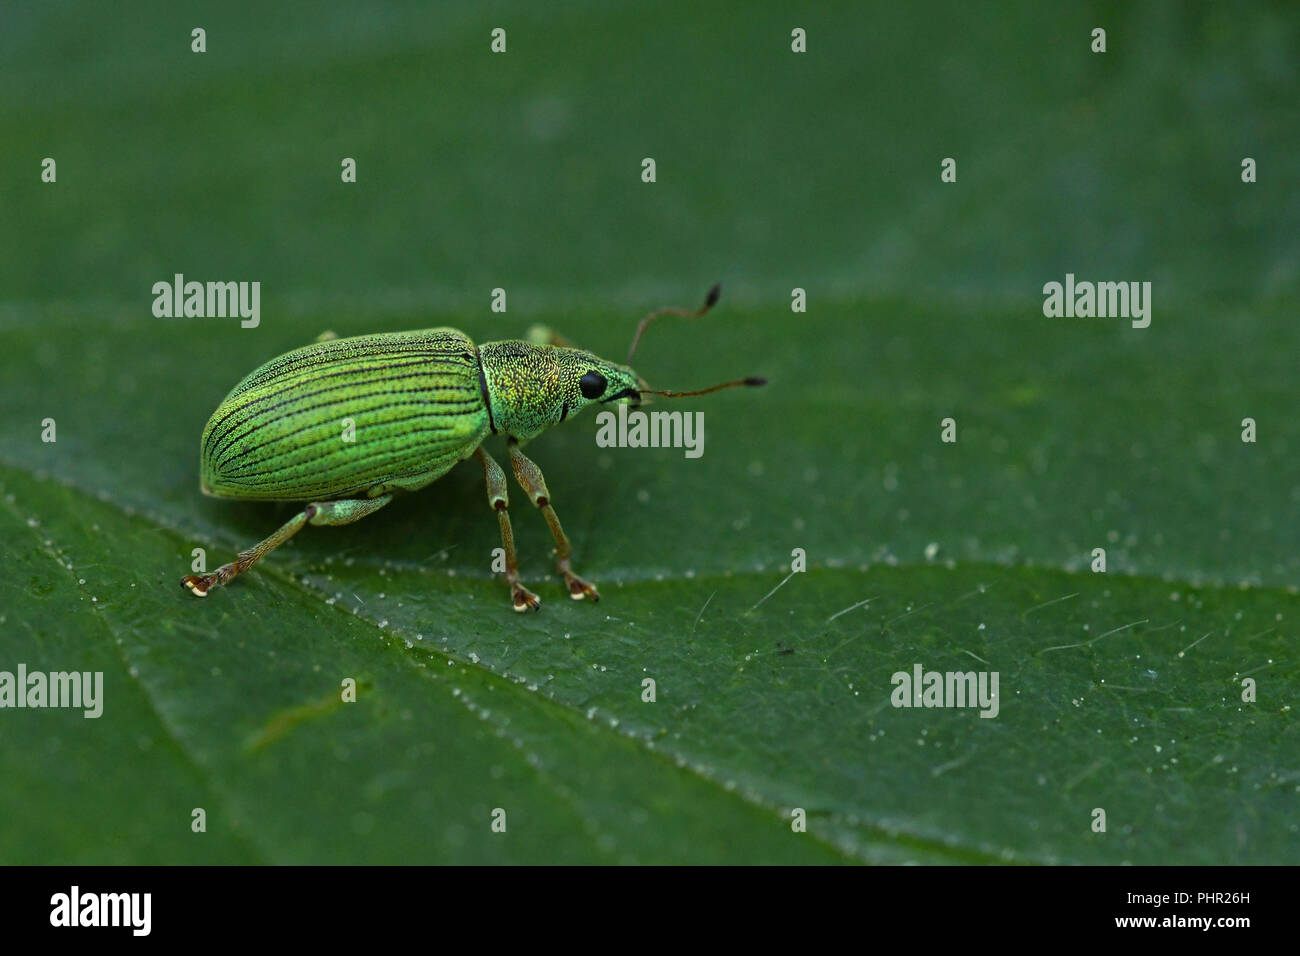 Silver green leaf weevil Stock Photo